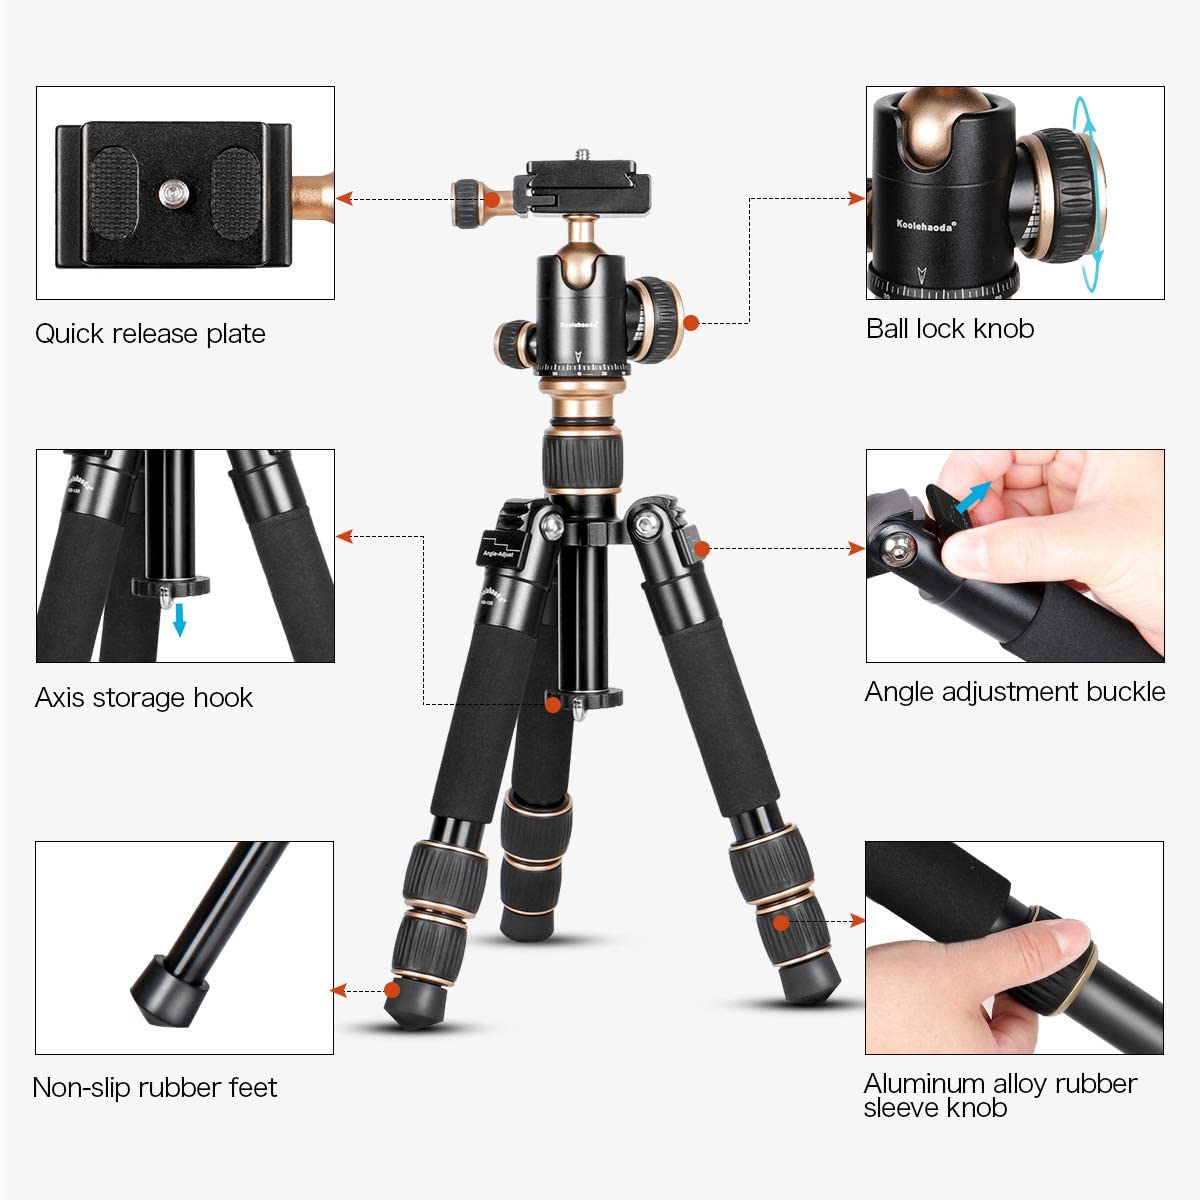 Portable Tabletop Mini Tripod,Height Adjustable 8-20inch,Compact Desktop Macro Mini Tripod with Carrying Bag,Weight only 1.5lbs / 0.68kg